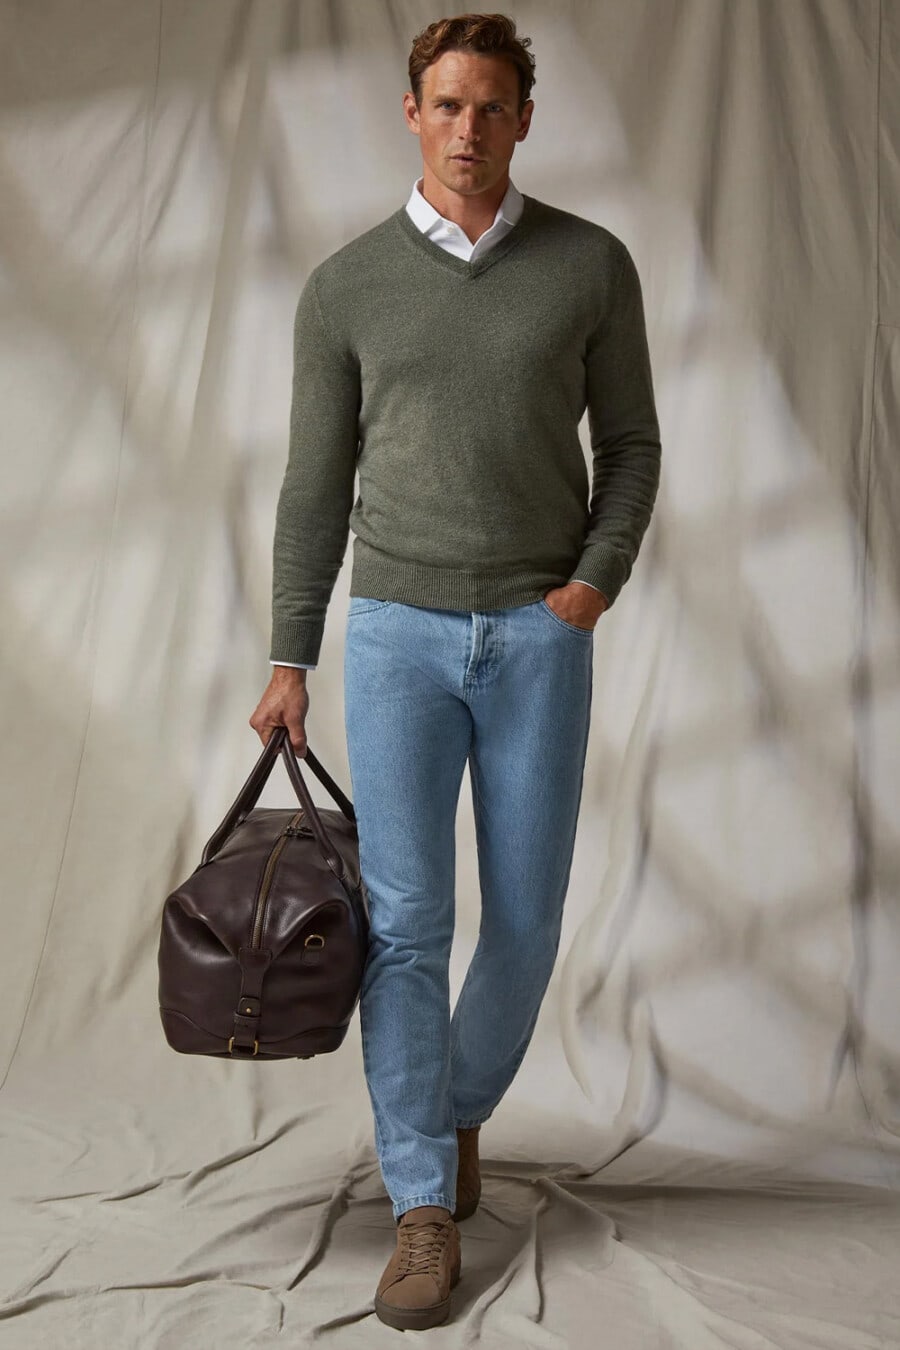 Men's pale light blue denim jeans, white dress shirt, green V-neck sweater, brown suede sneakers and brown leather weekender bag outfit